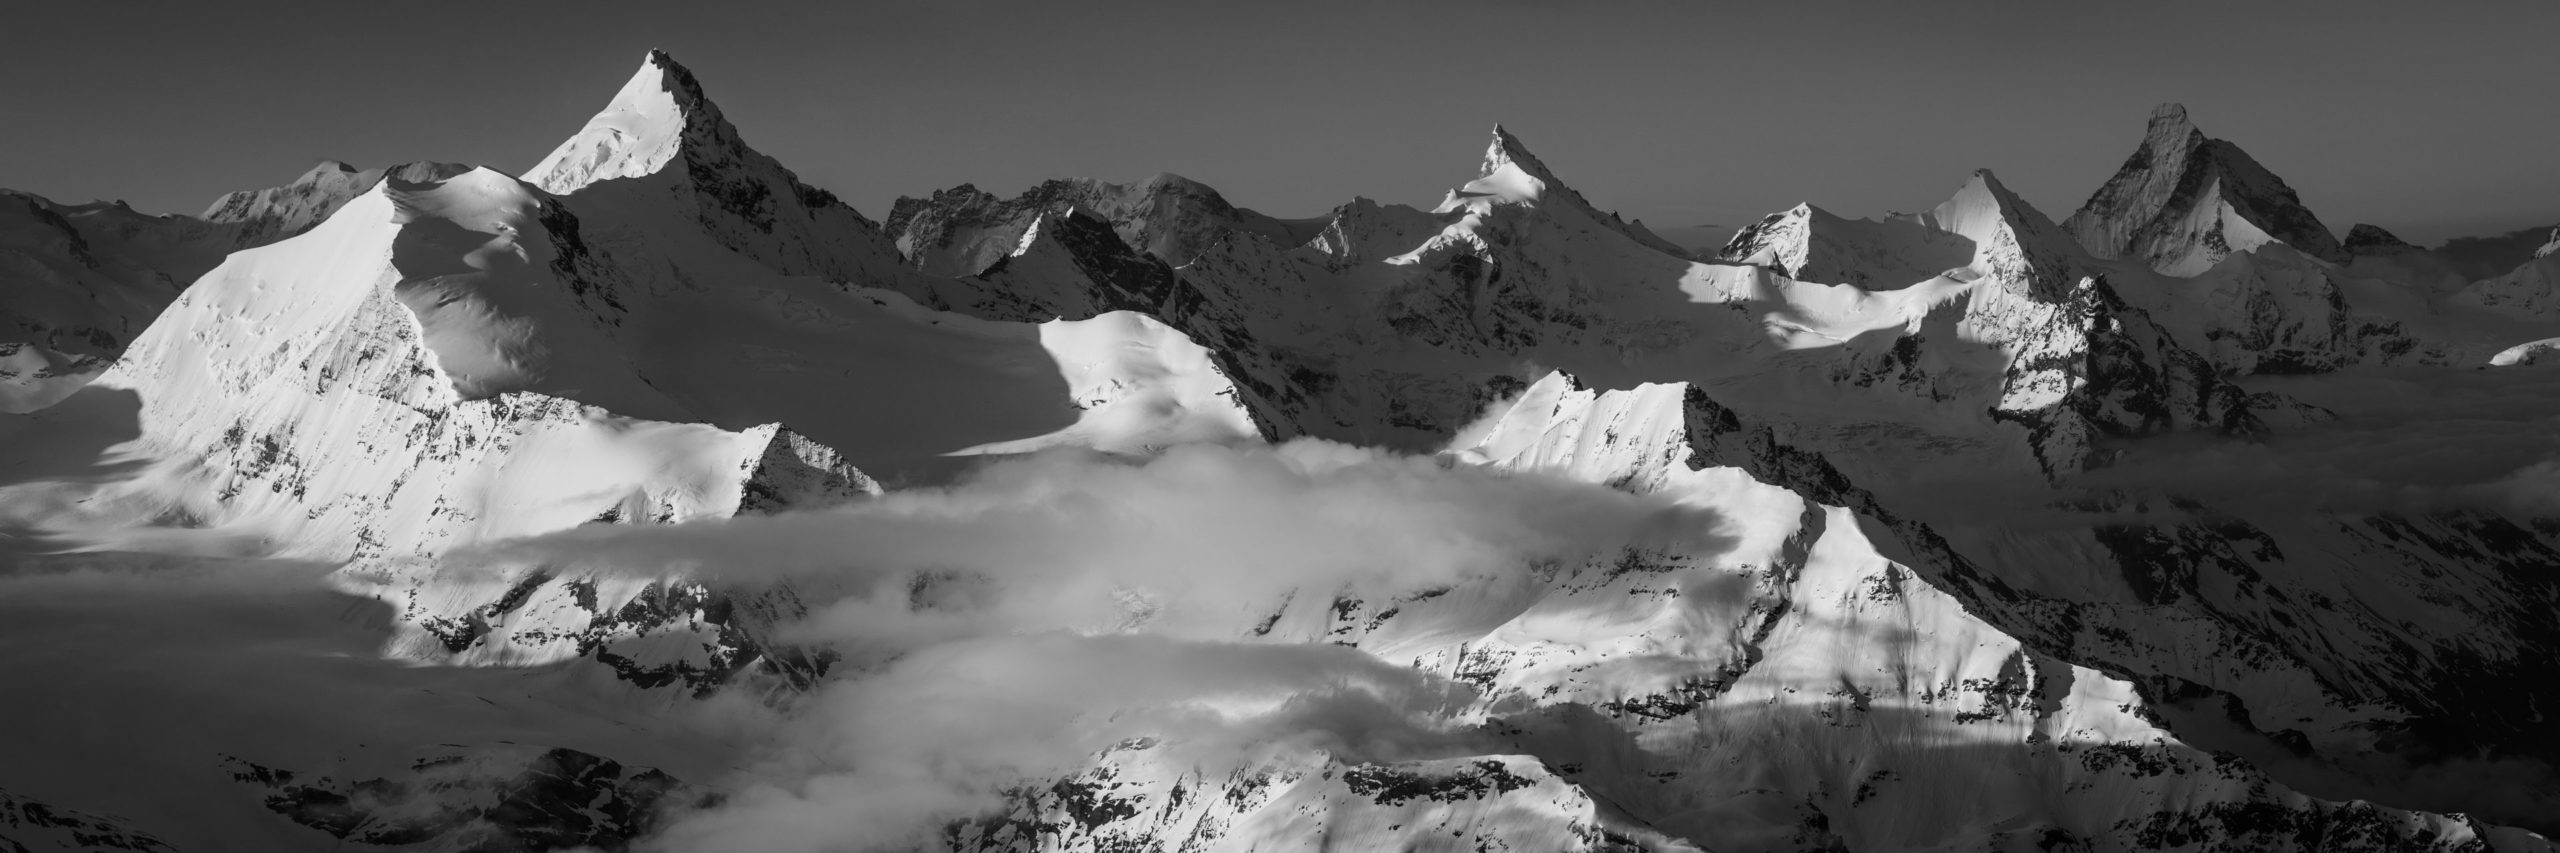 Mountain picture Swiss Valais - Black and white mountain picture Alps - mountain panorama picture - mountain sunset picture